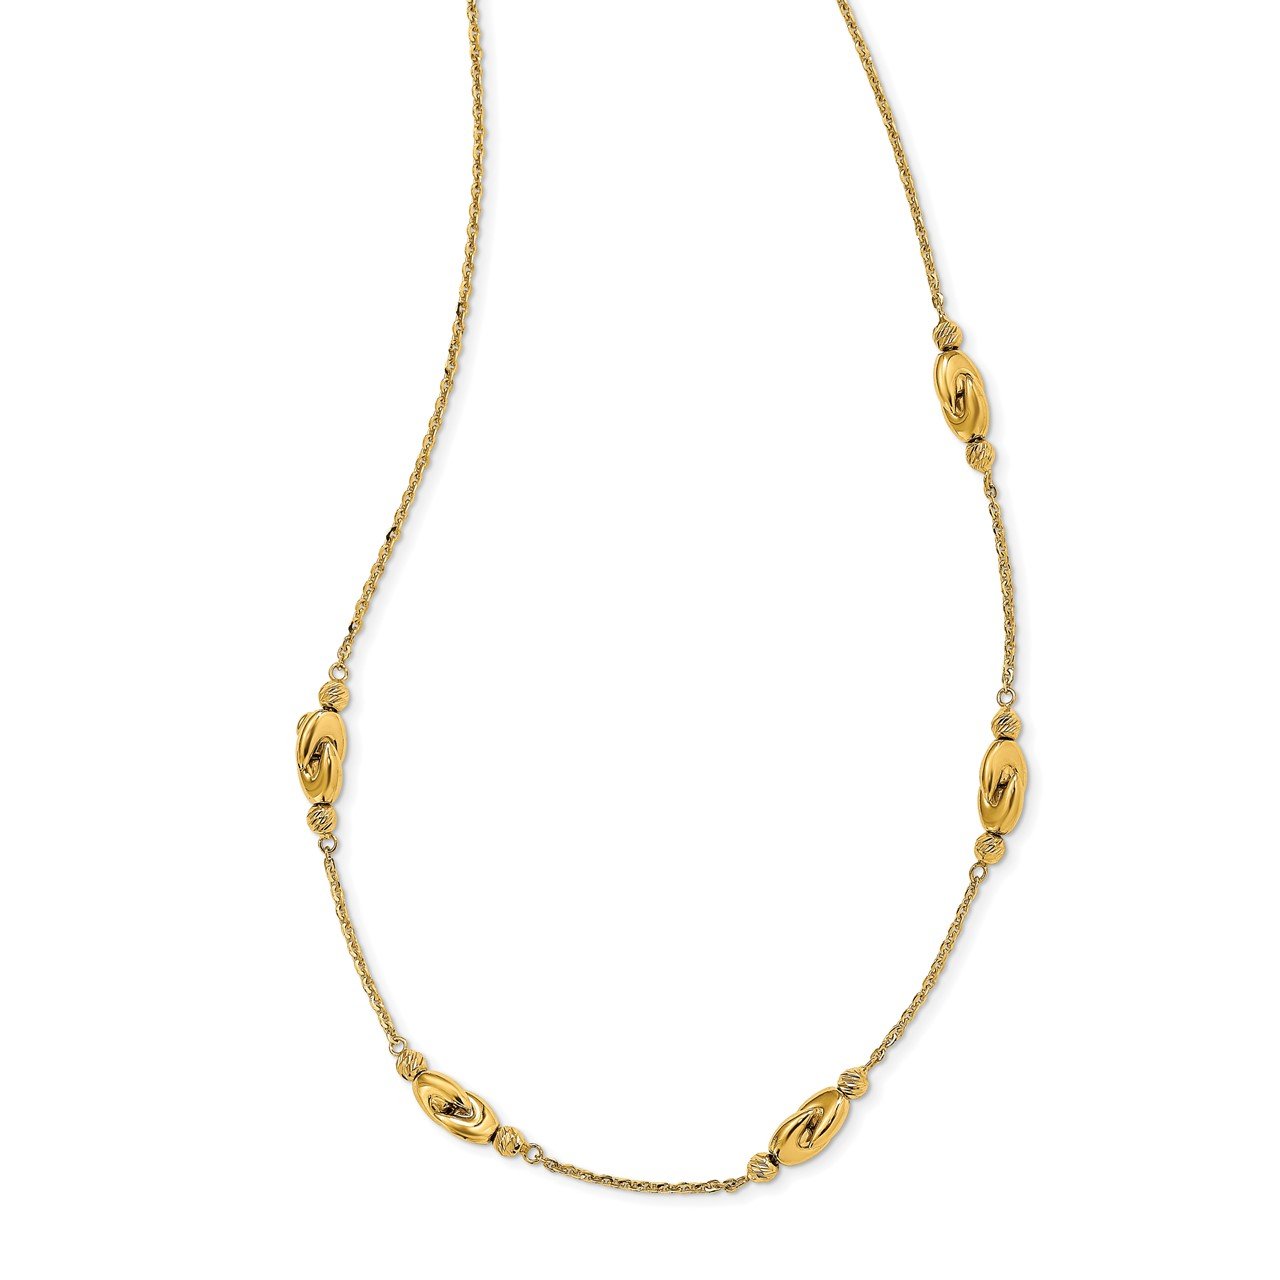 14K Polished 5 Station D/C Beads with 2 in ext. Necklace